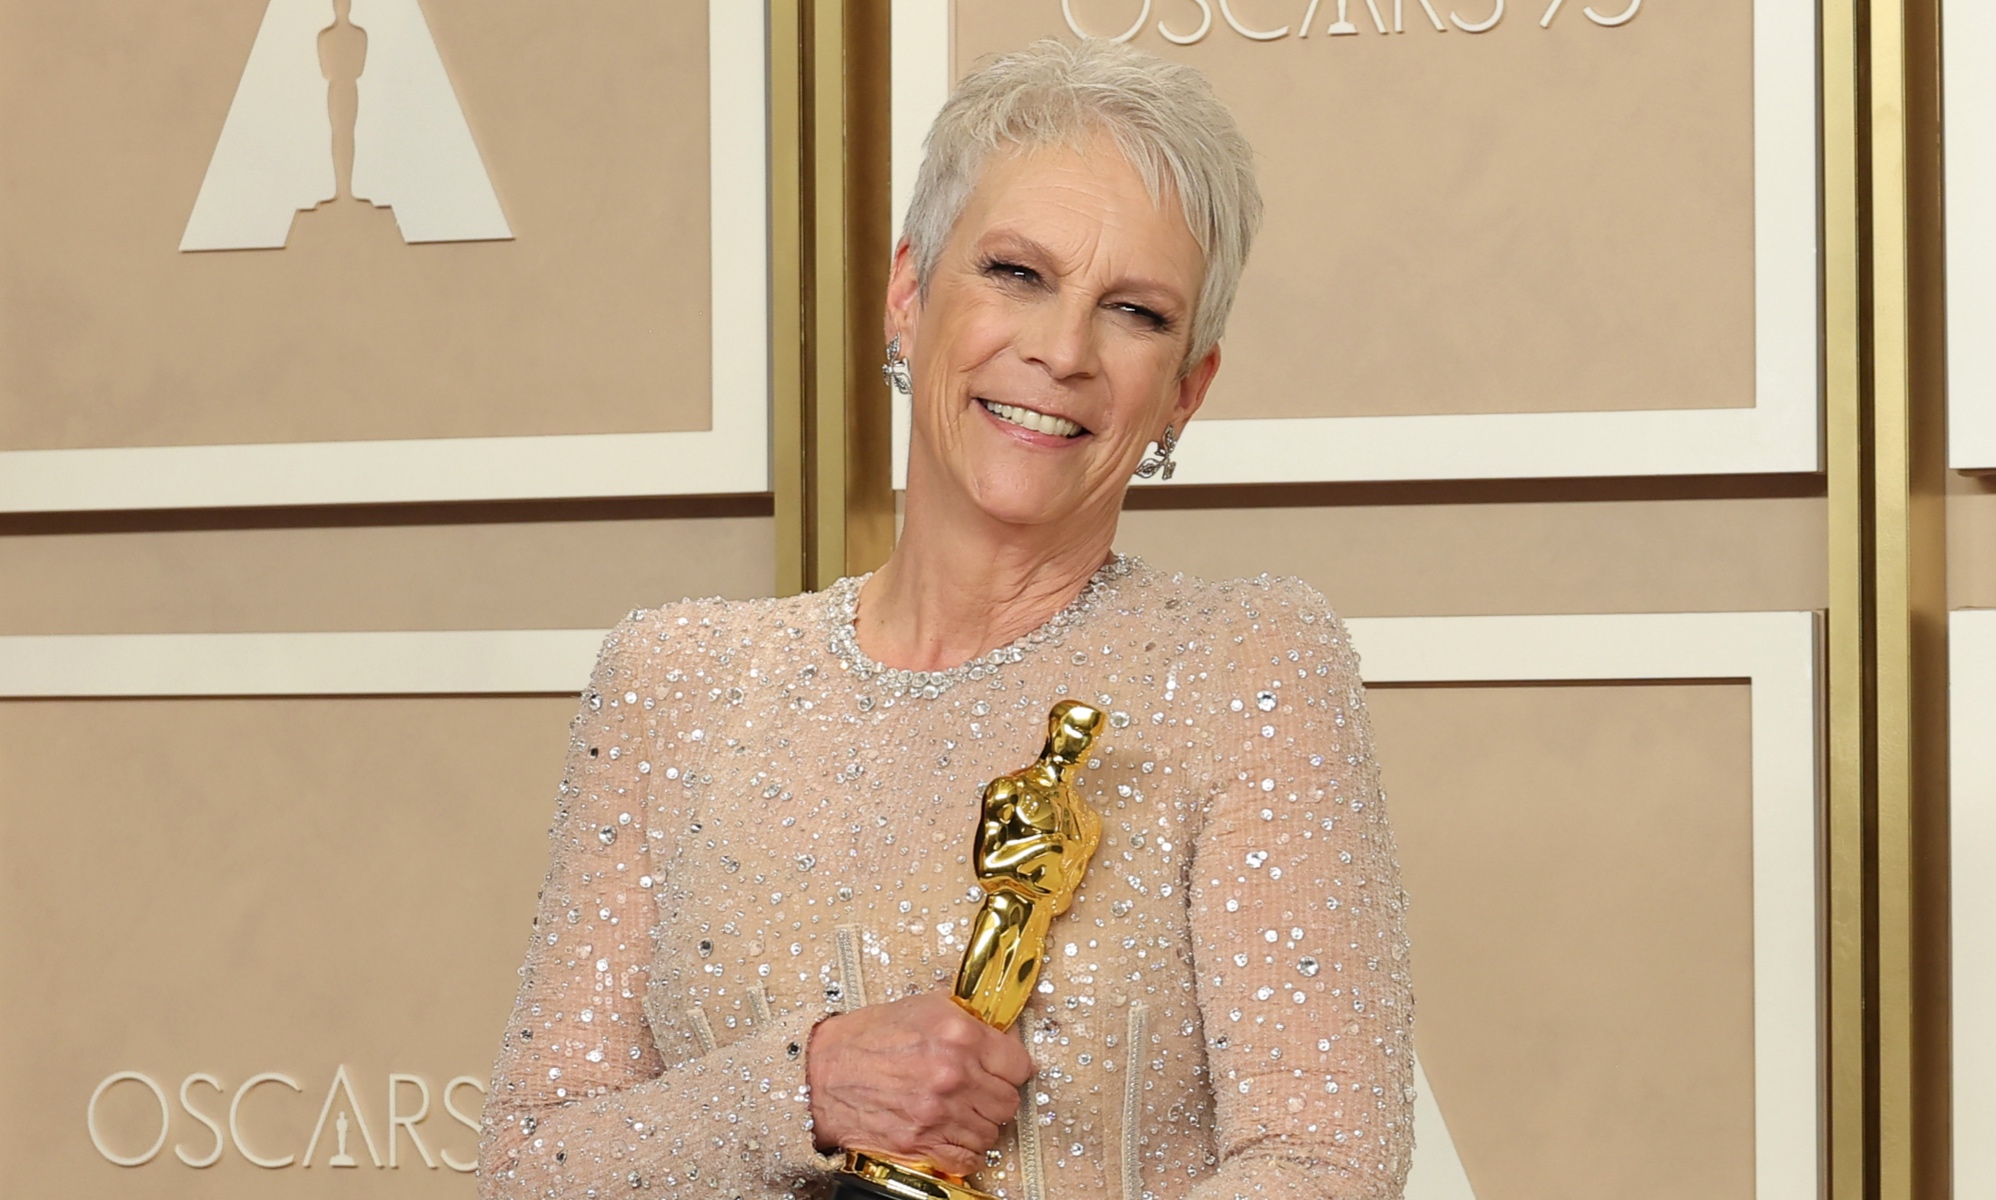 Jamie Lee Curtis reflects on gender neutral categories at Oscars